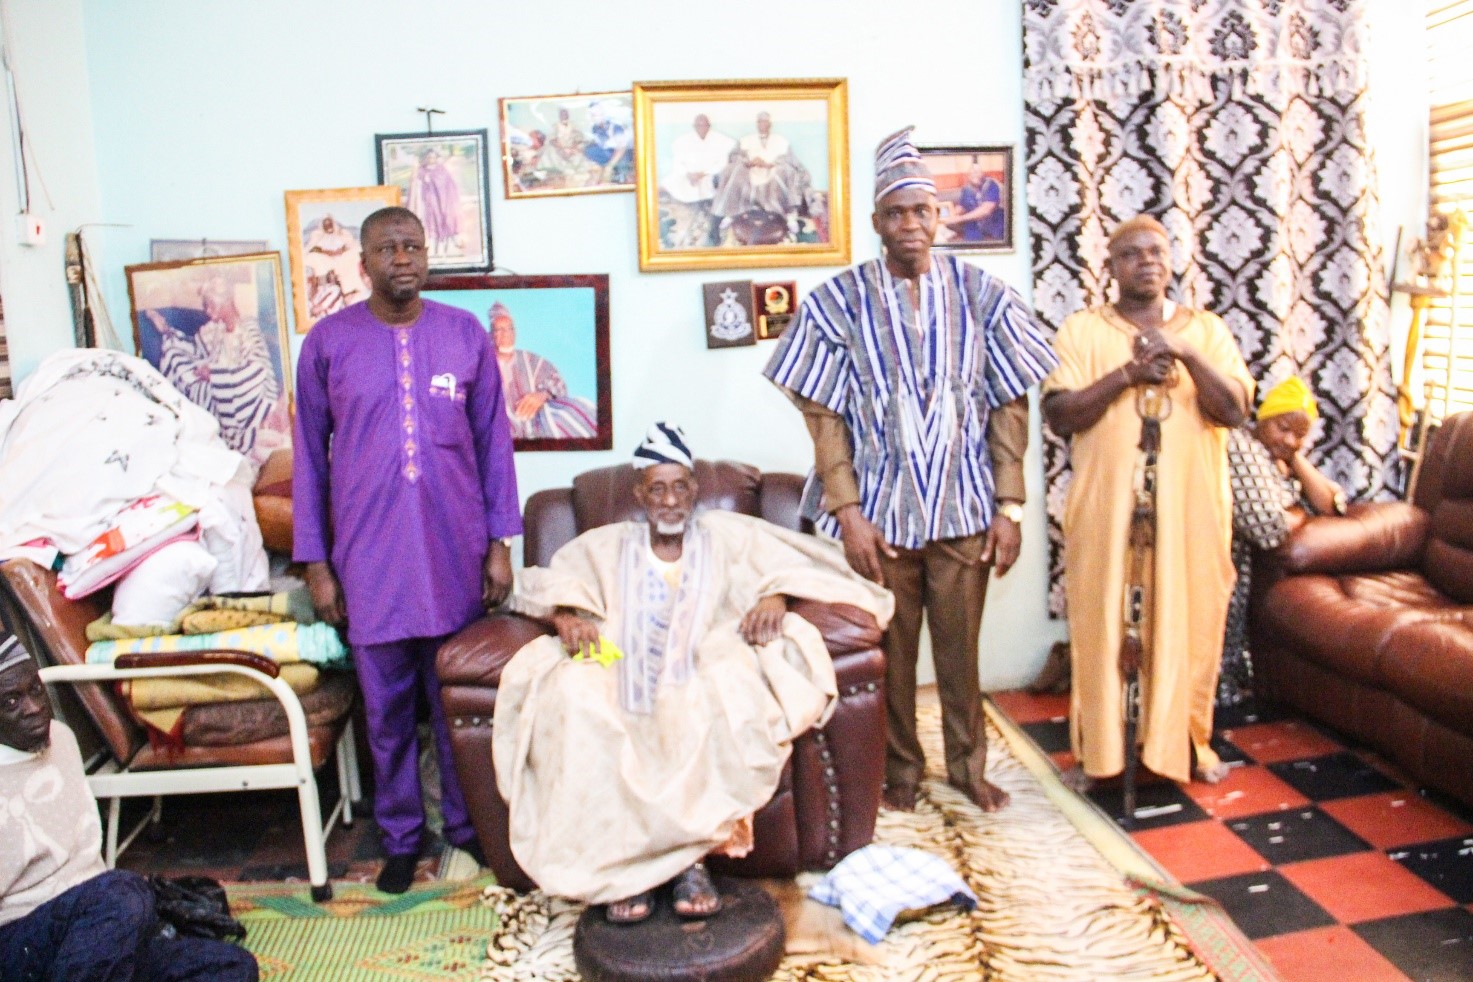 Vice-Chancellor of The University For Development Studies Pays a Courtesy Call on The Yagbon-Wura.